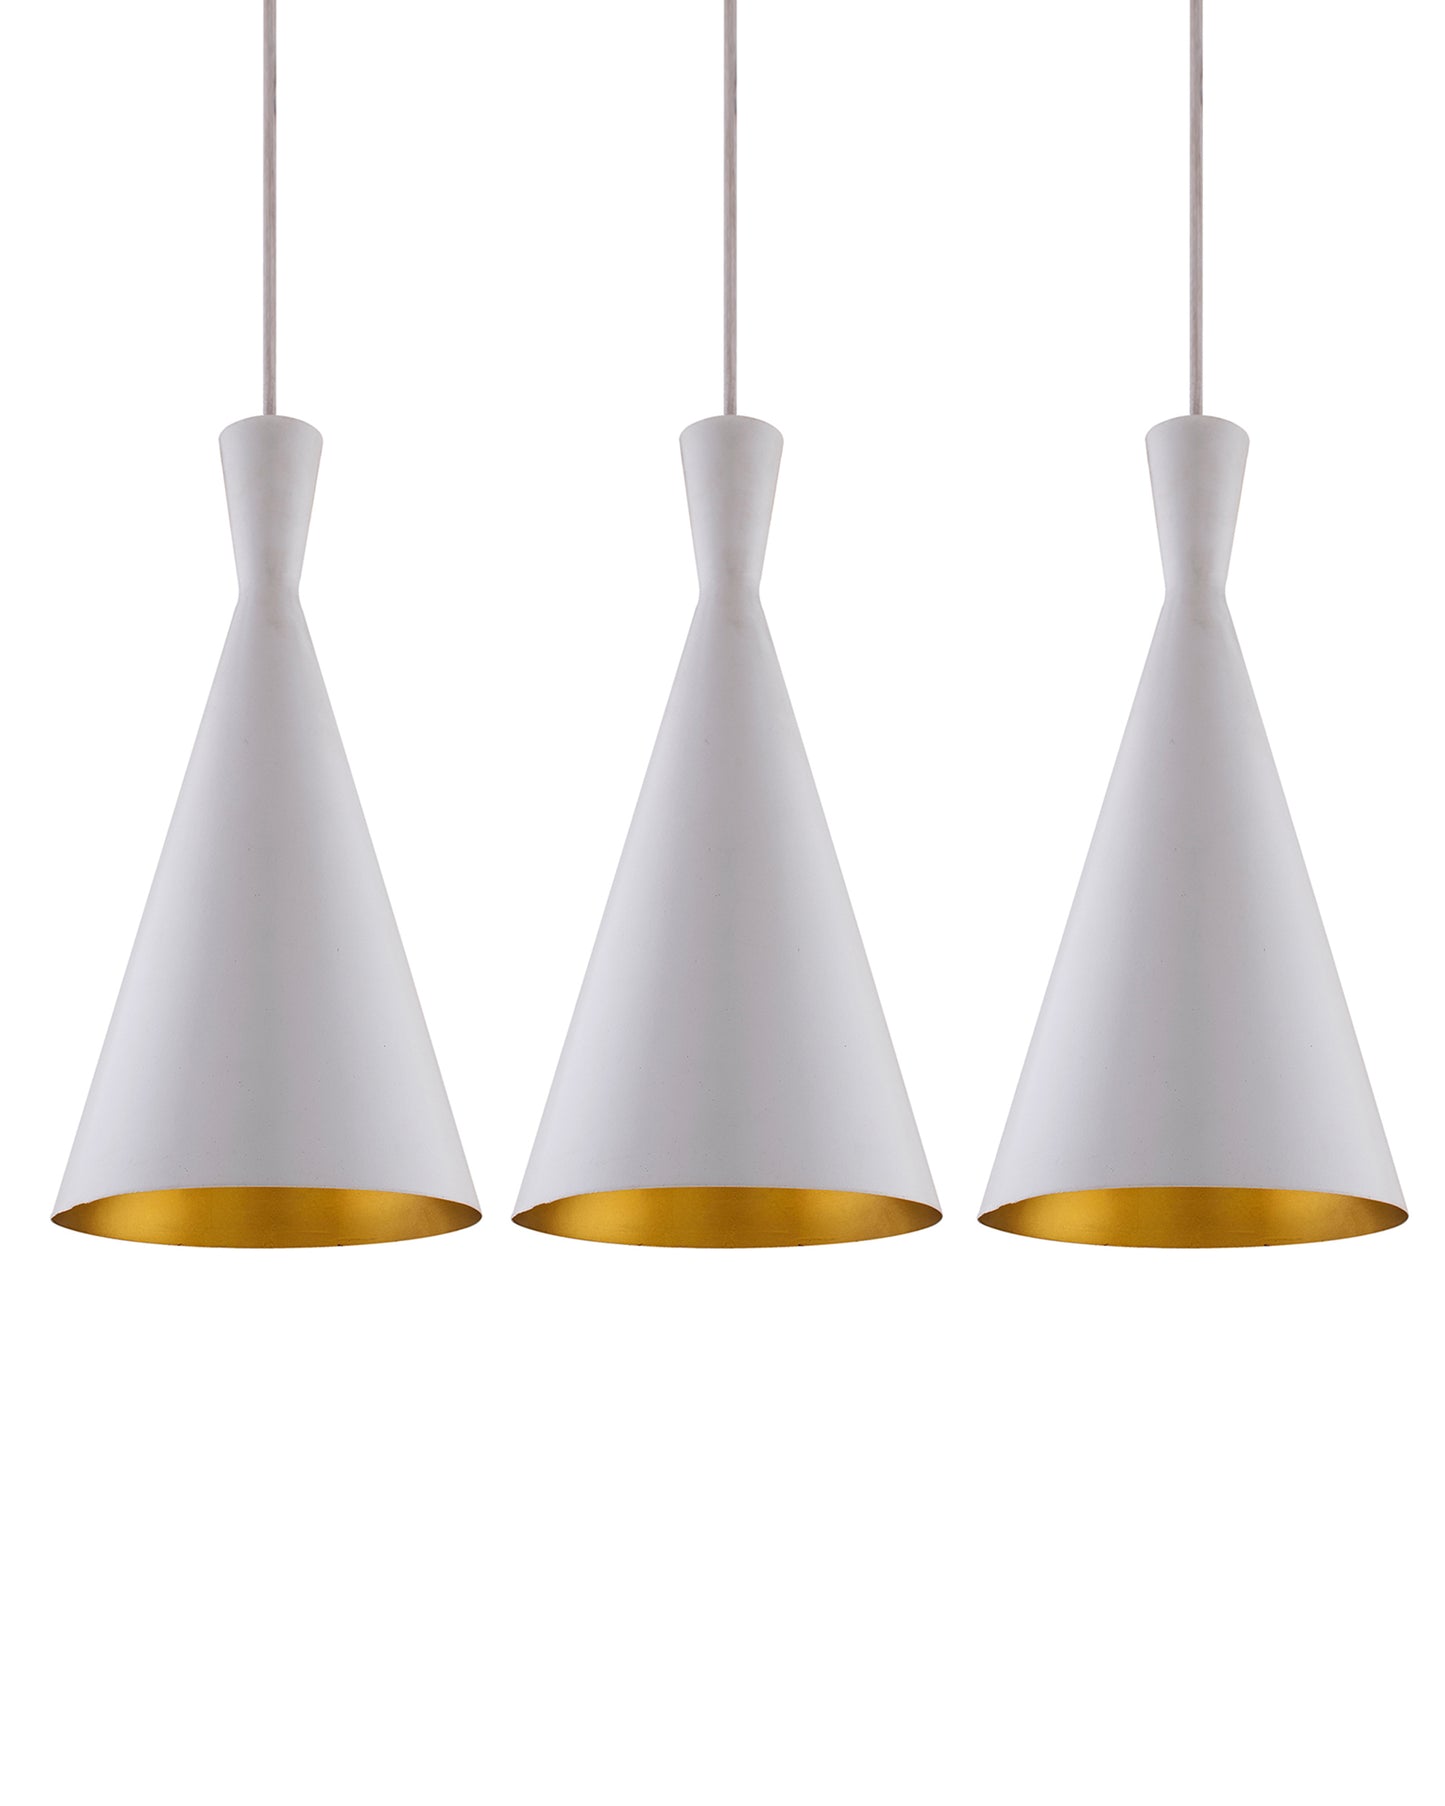 3-Lights Linear Cluster Chandelier Modern Inverted Cone Shaped hanging Light, E27 Holder, Decorative,URBAN Retro, Nordic Style